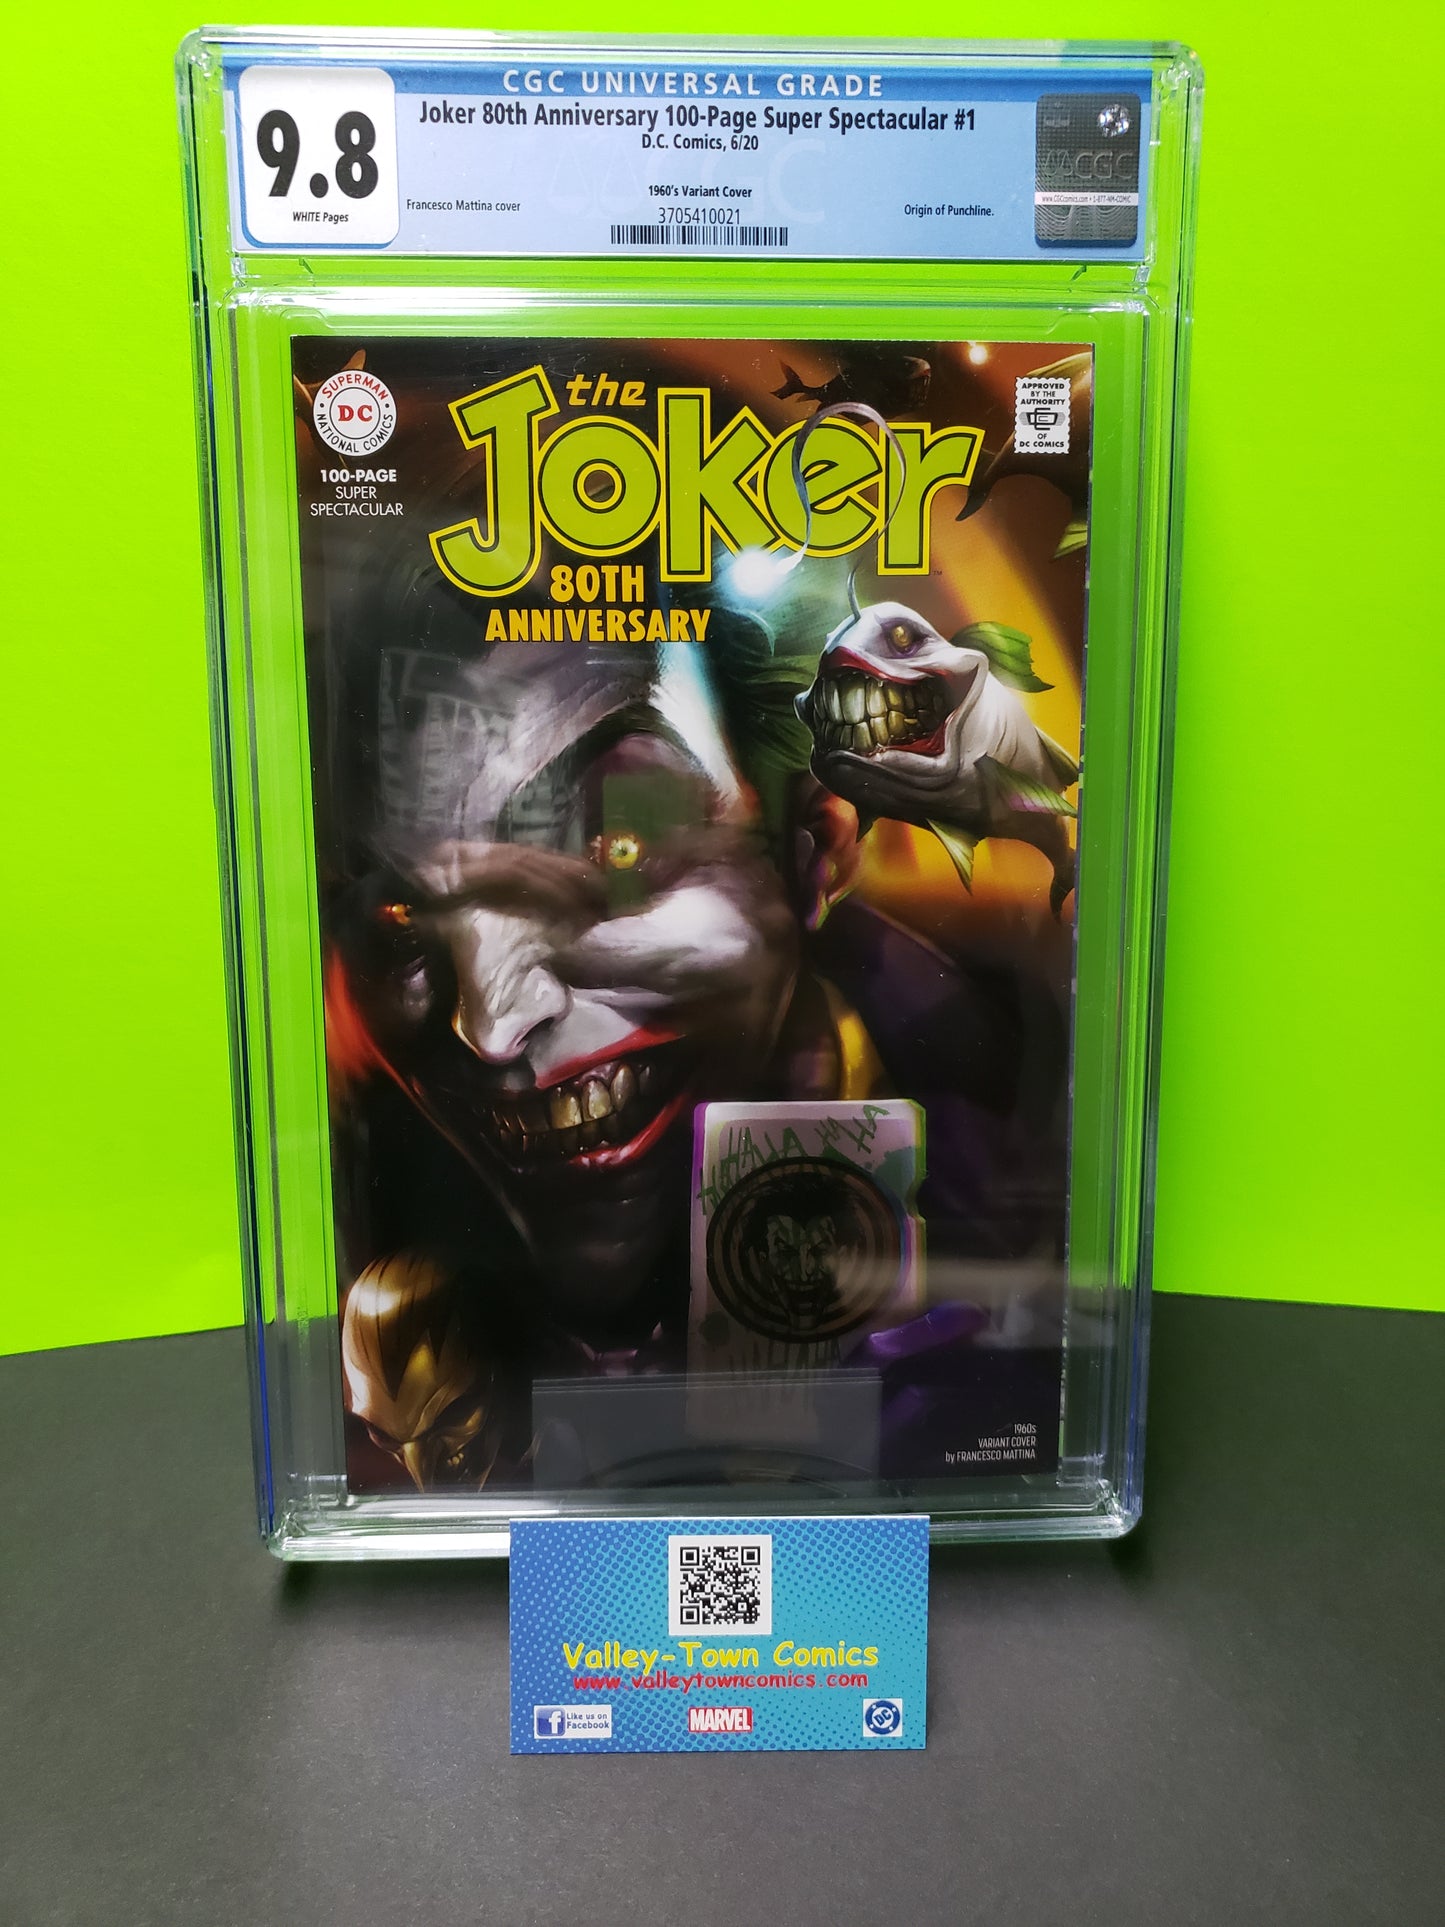 Joker 80th Anniversary 100-Page Super Spectacular #1